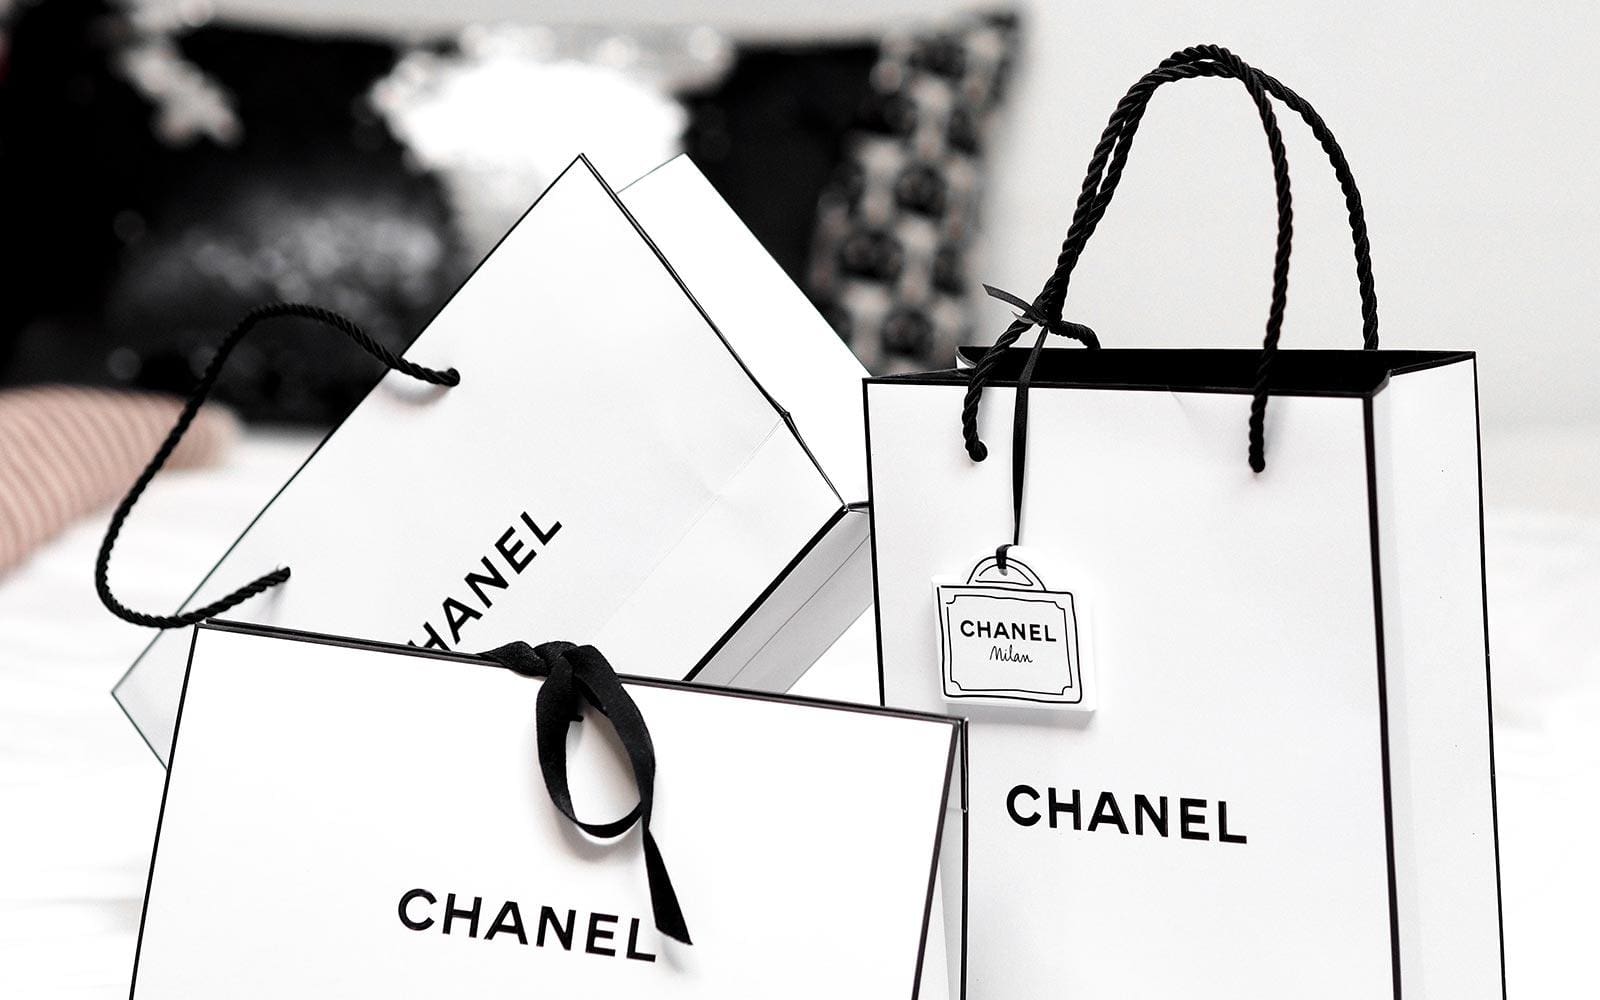 THE REAL REASON FOR THE HIGH PRICE OF LUXURY BRANDS – DARIO'S